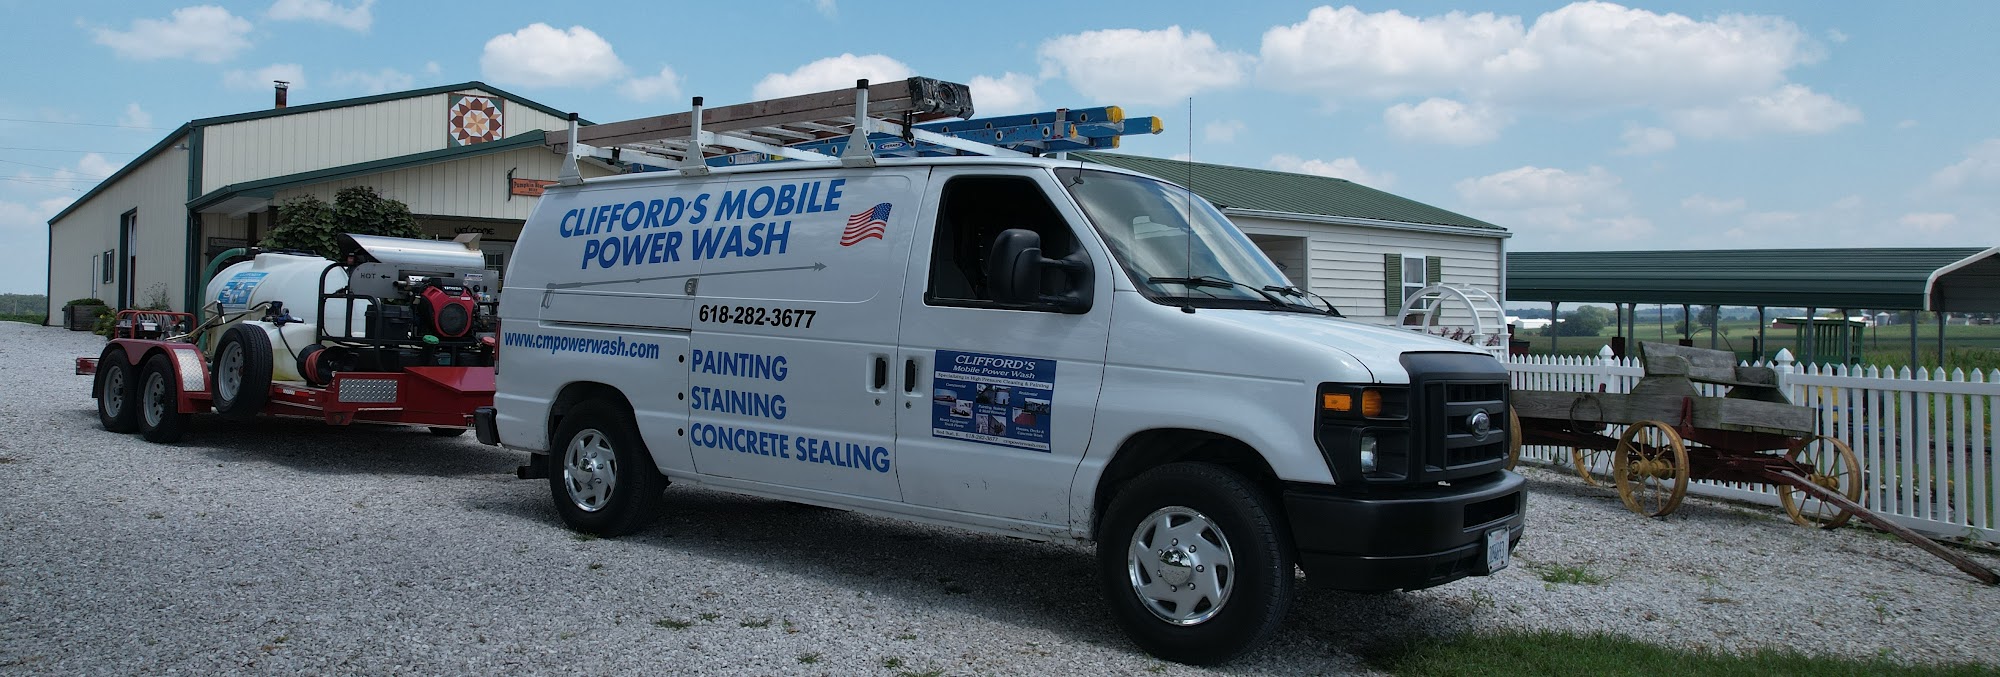 Clifford's Mobile Power Wash & Painting Services 6709 Mm Rd, Red Bud Illinois 62278